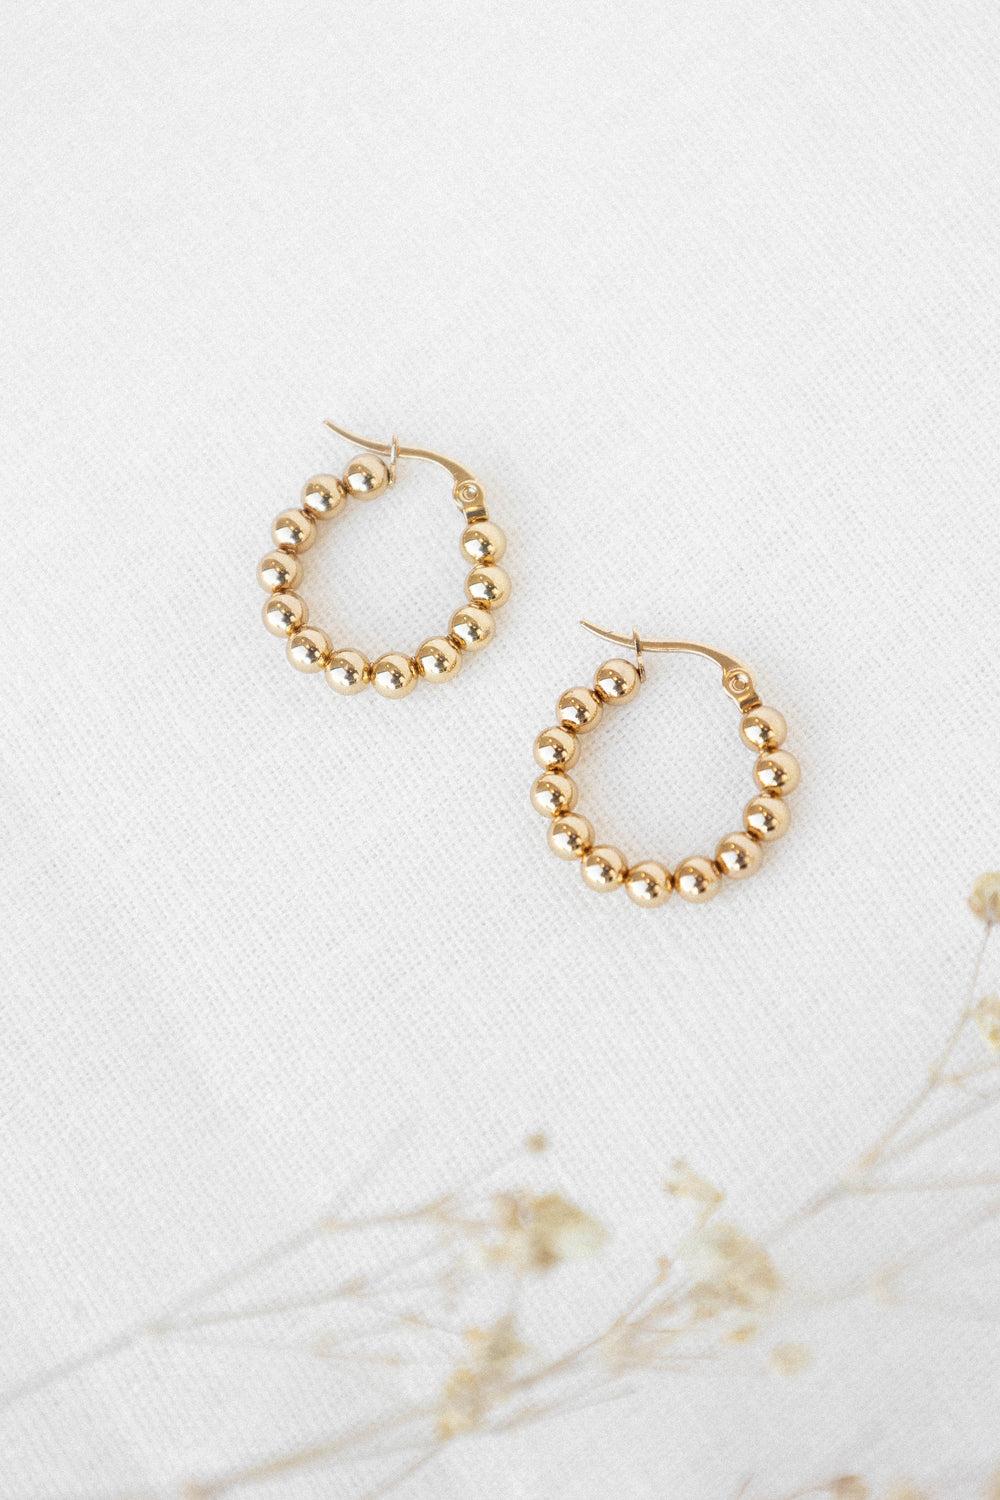 Petal and Pup USA ACCESSORIES Chloe Hoop Earrings - Gold One Size